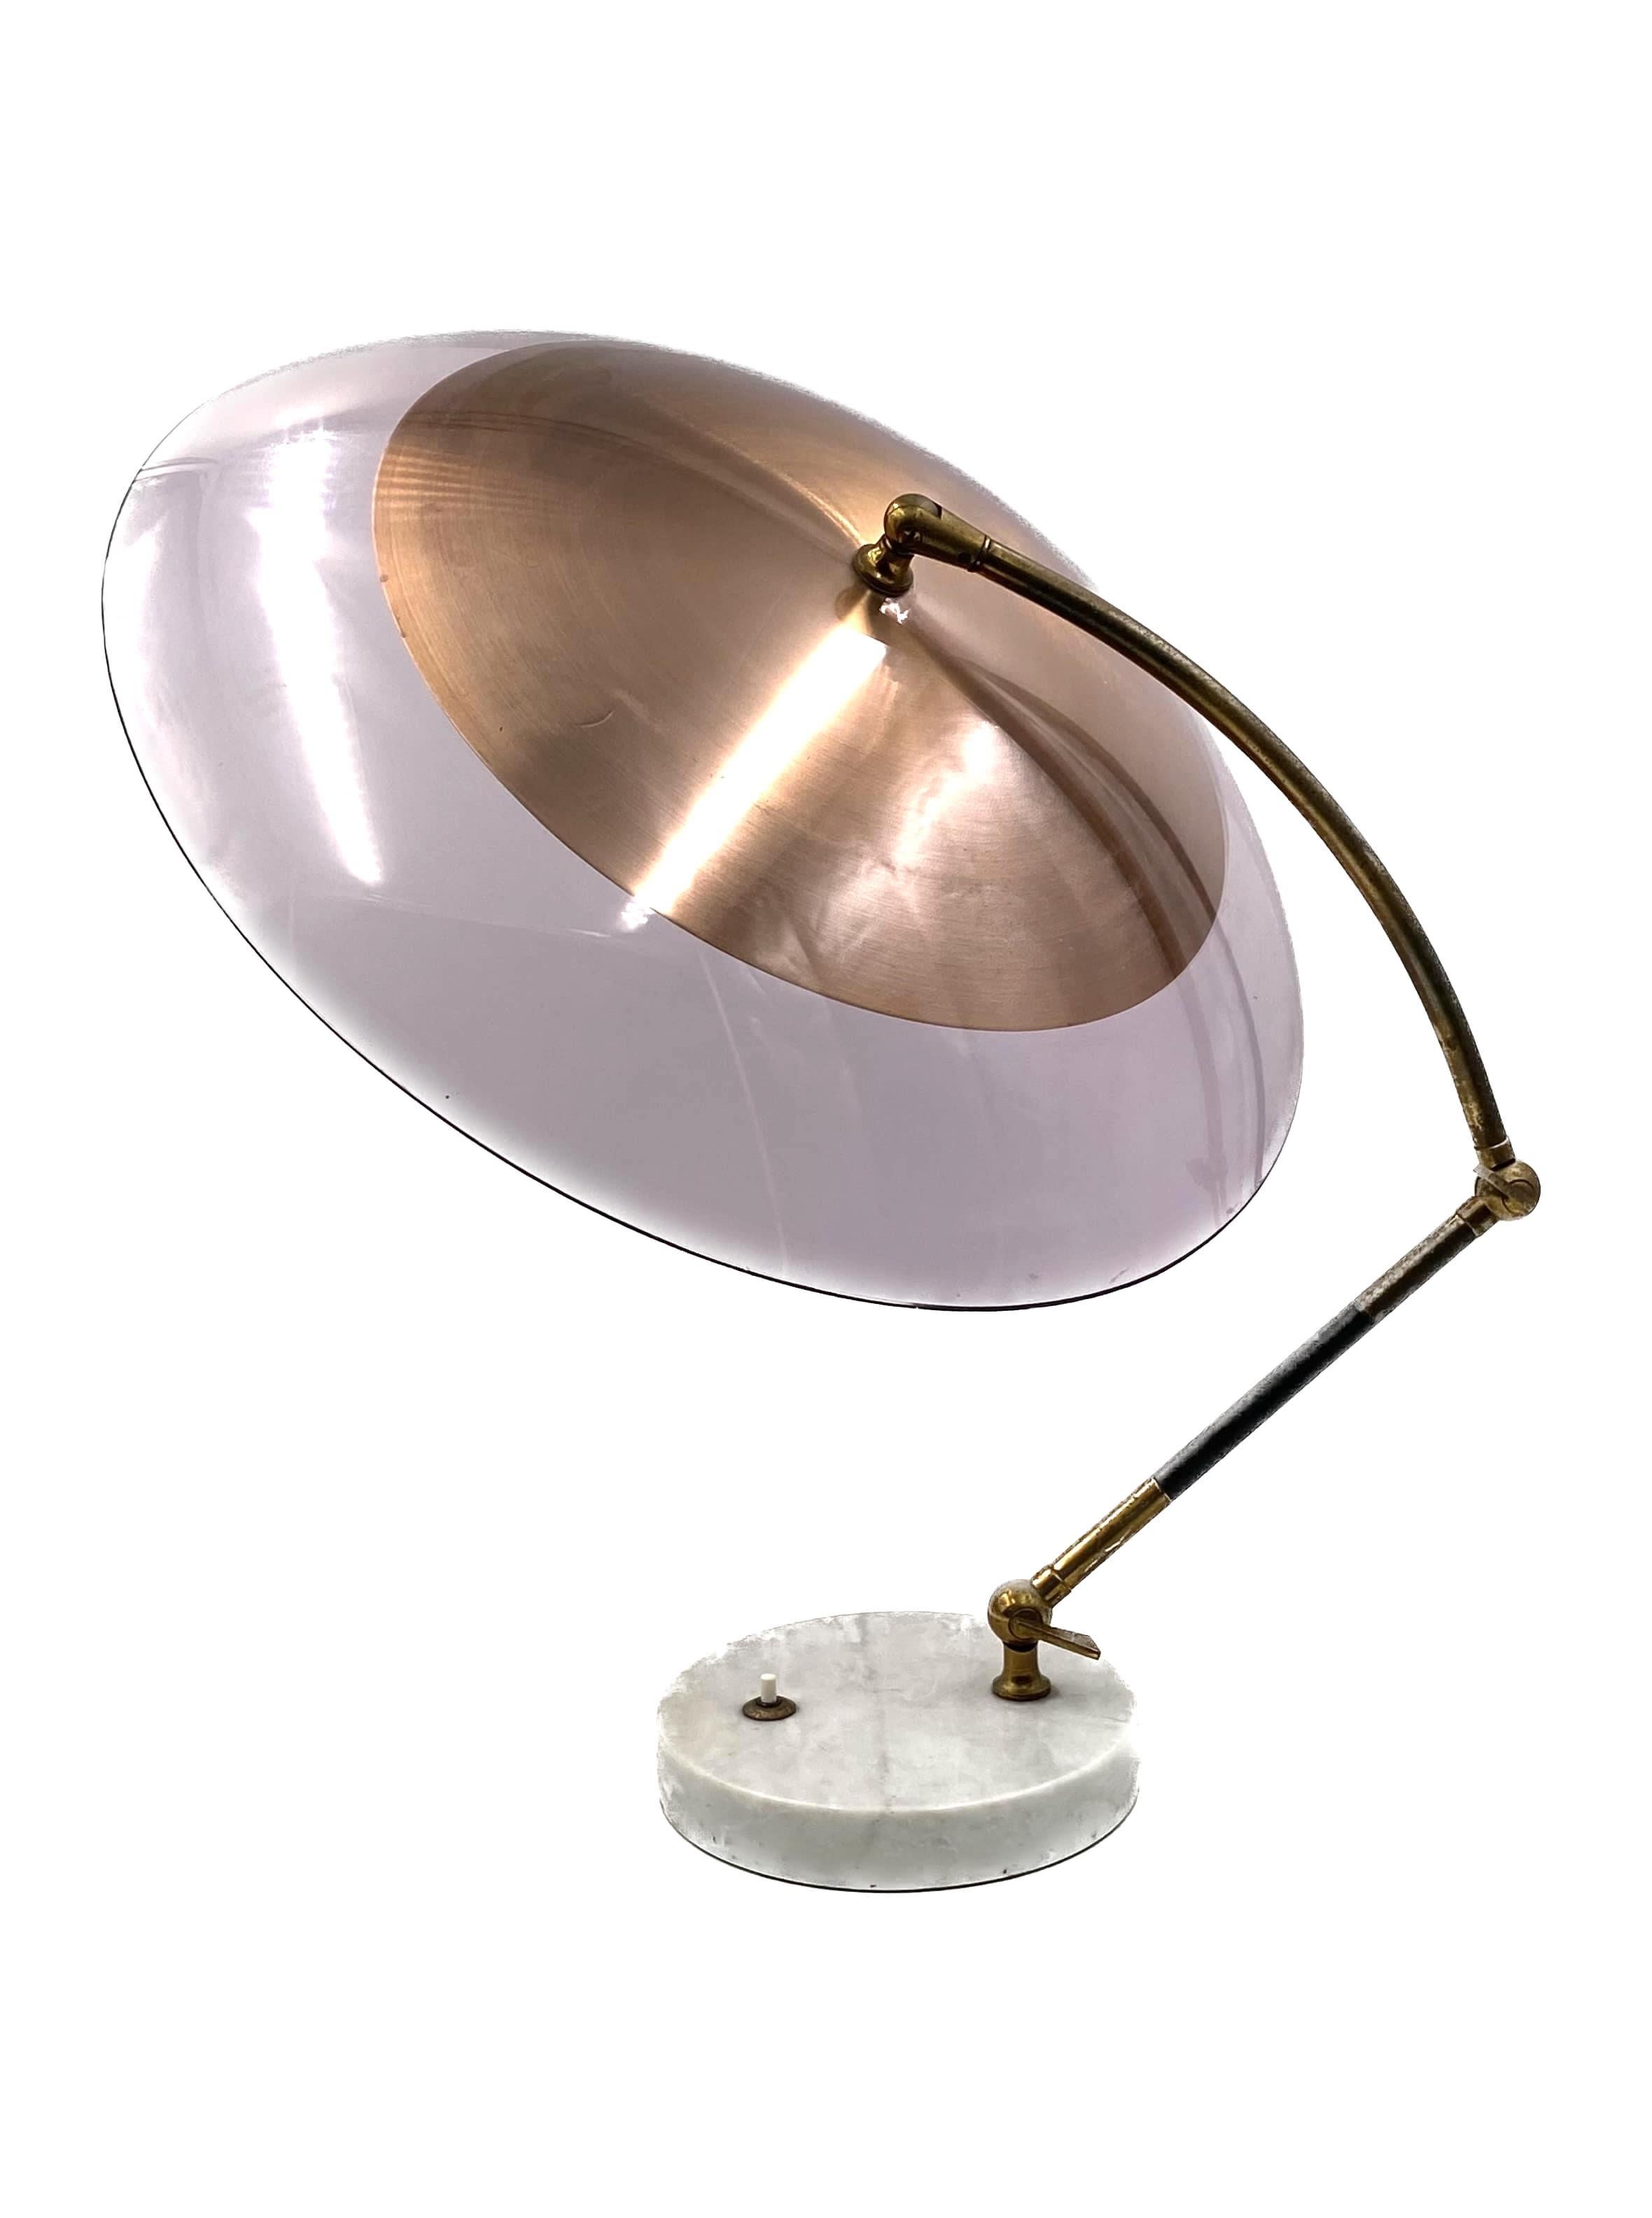 Stilux, mod. Orleans dome table lamp, Stilux Milano Italy, 1955 For Sale 6